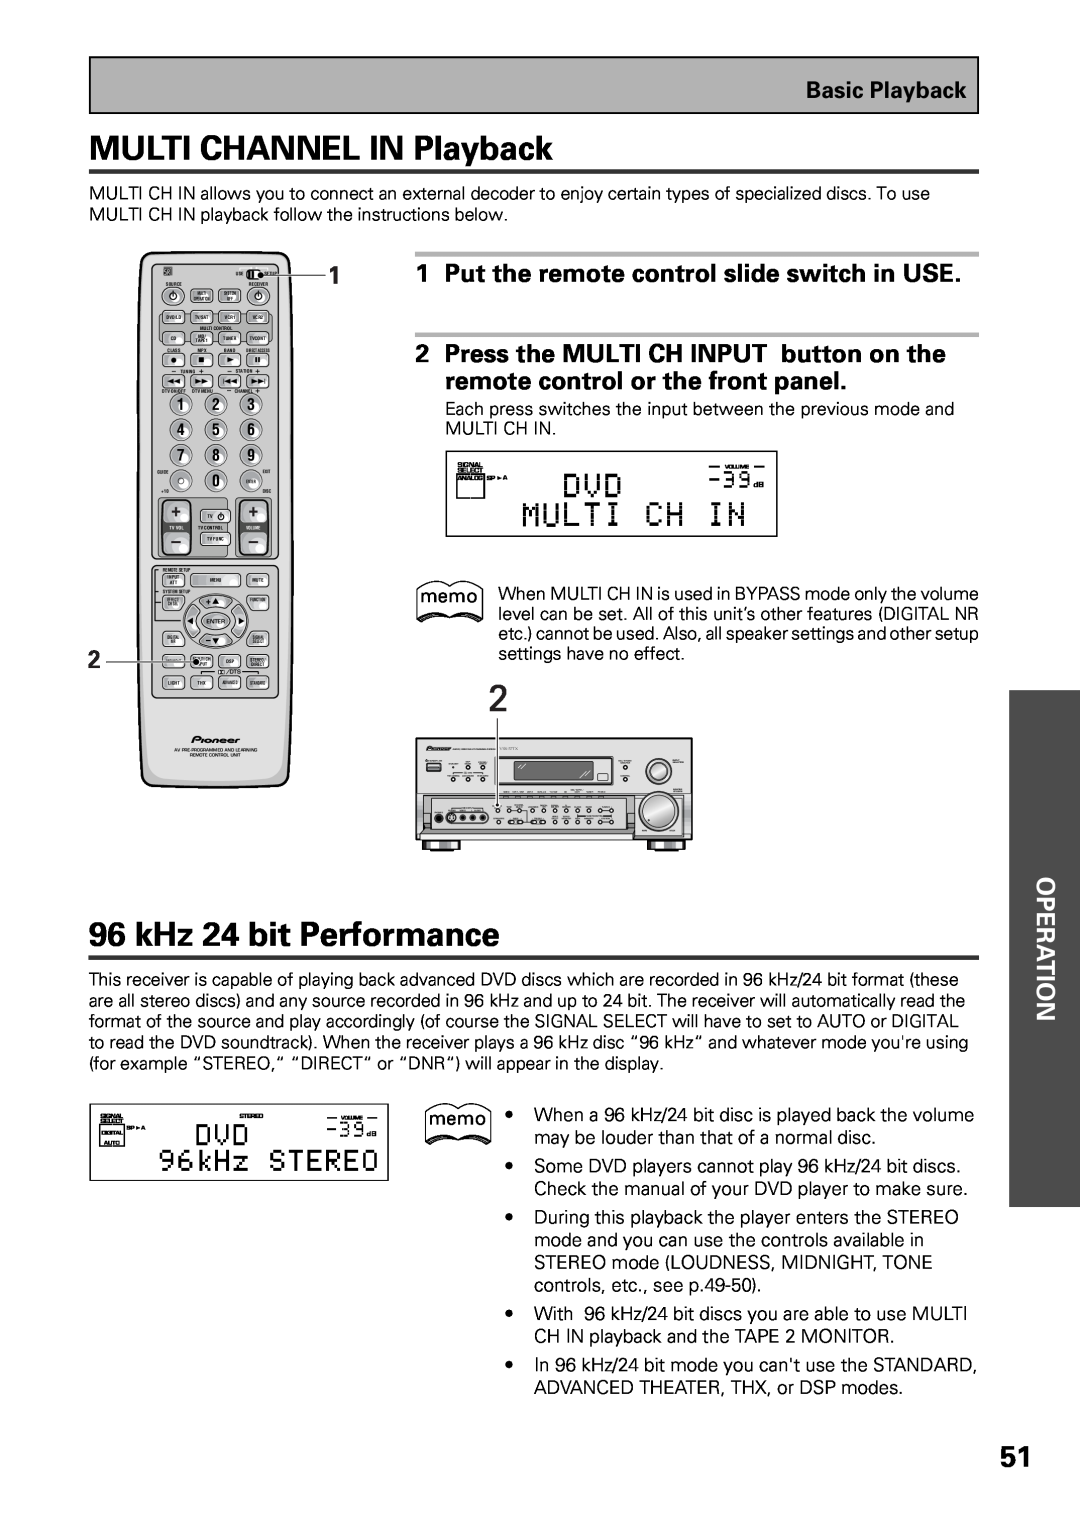 Pioneer VSX-37TX MULTI CHANNEL IN Playback, kHz 24 bit Performance, Put the remote control slide switch in USE, Operation 